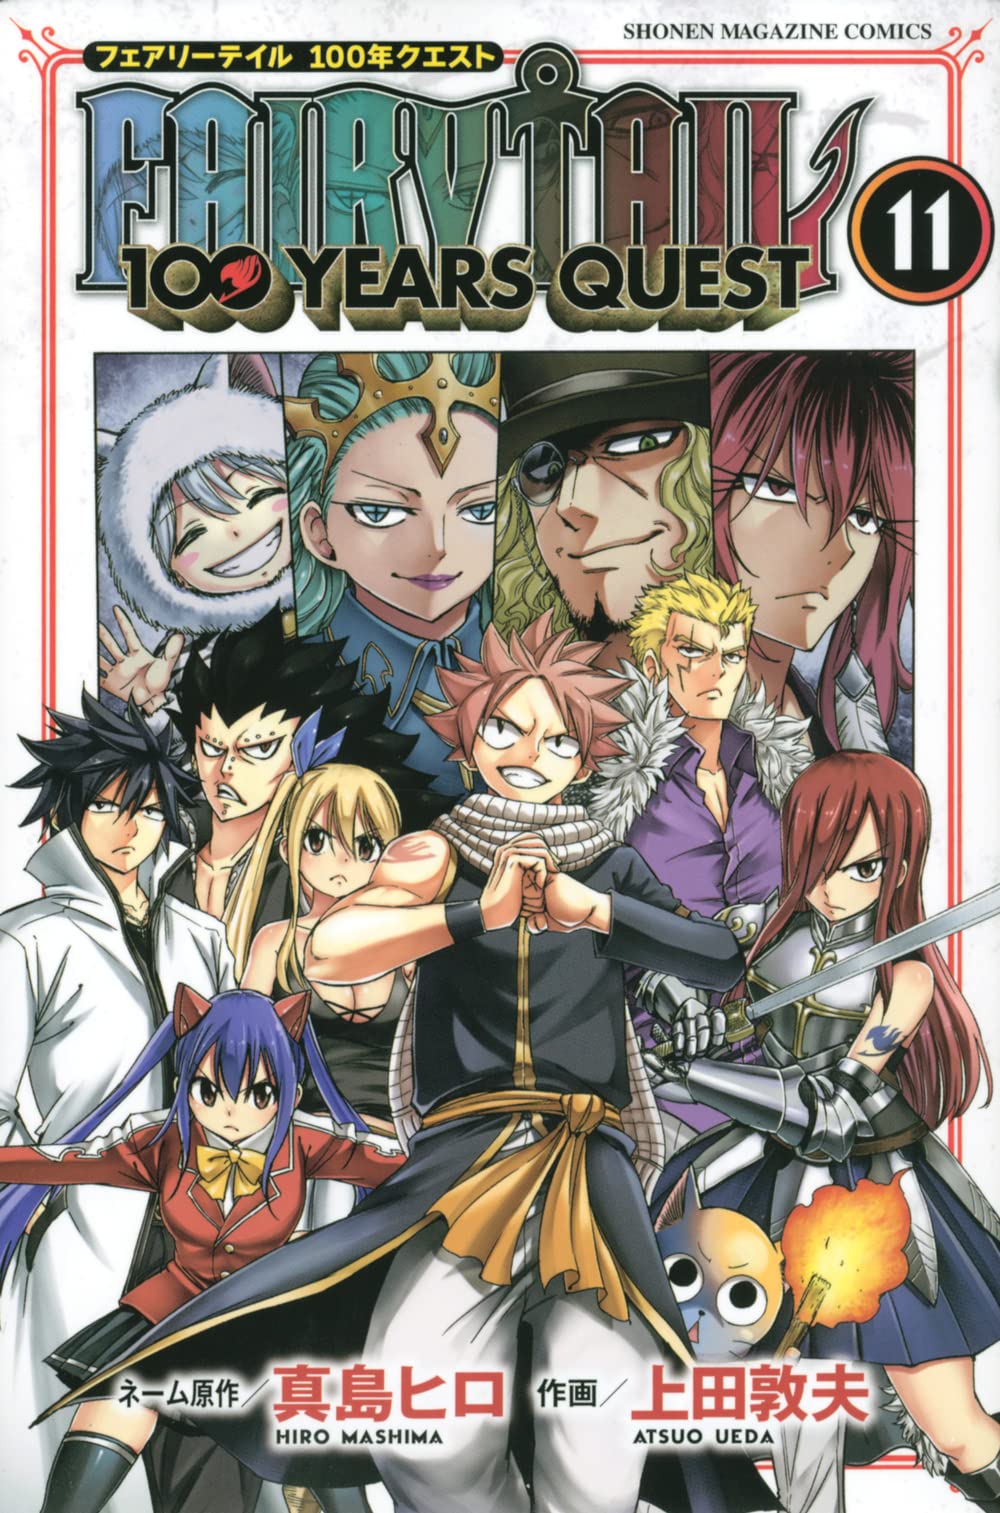 FAIRY TAIL 100 YEARS QUEST-tile - IntoxiAnime